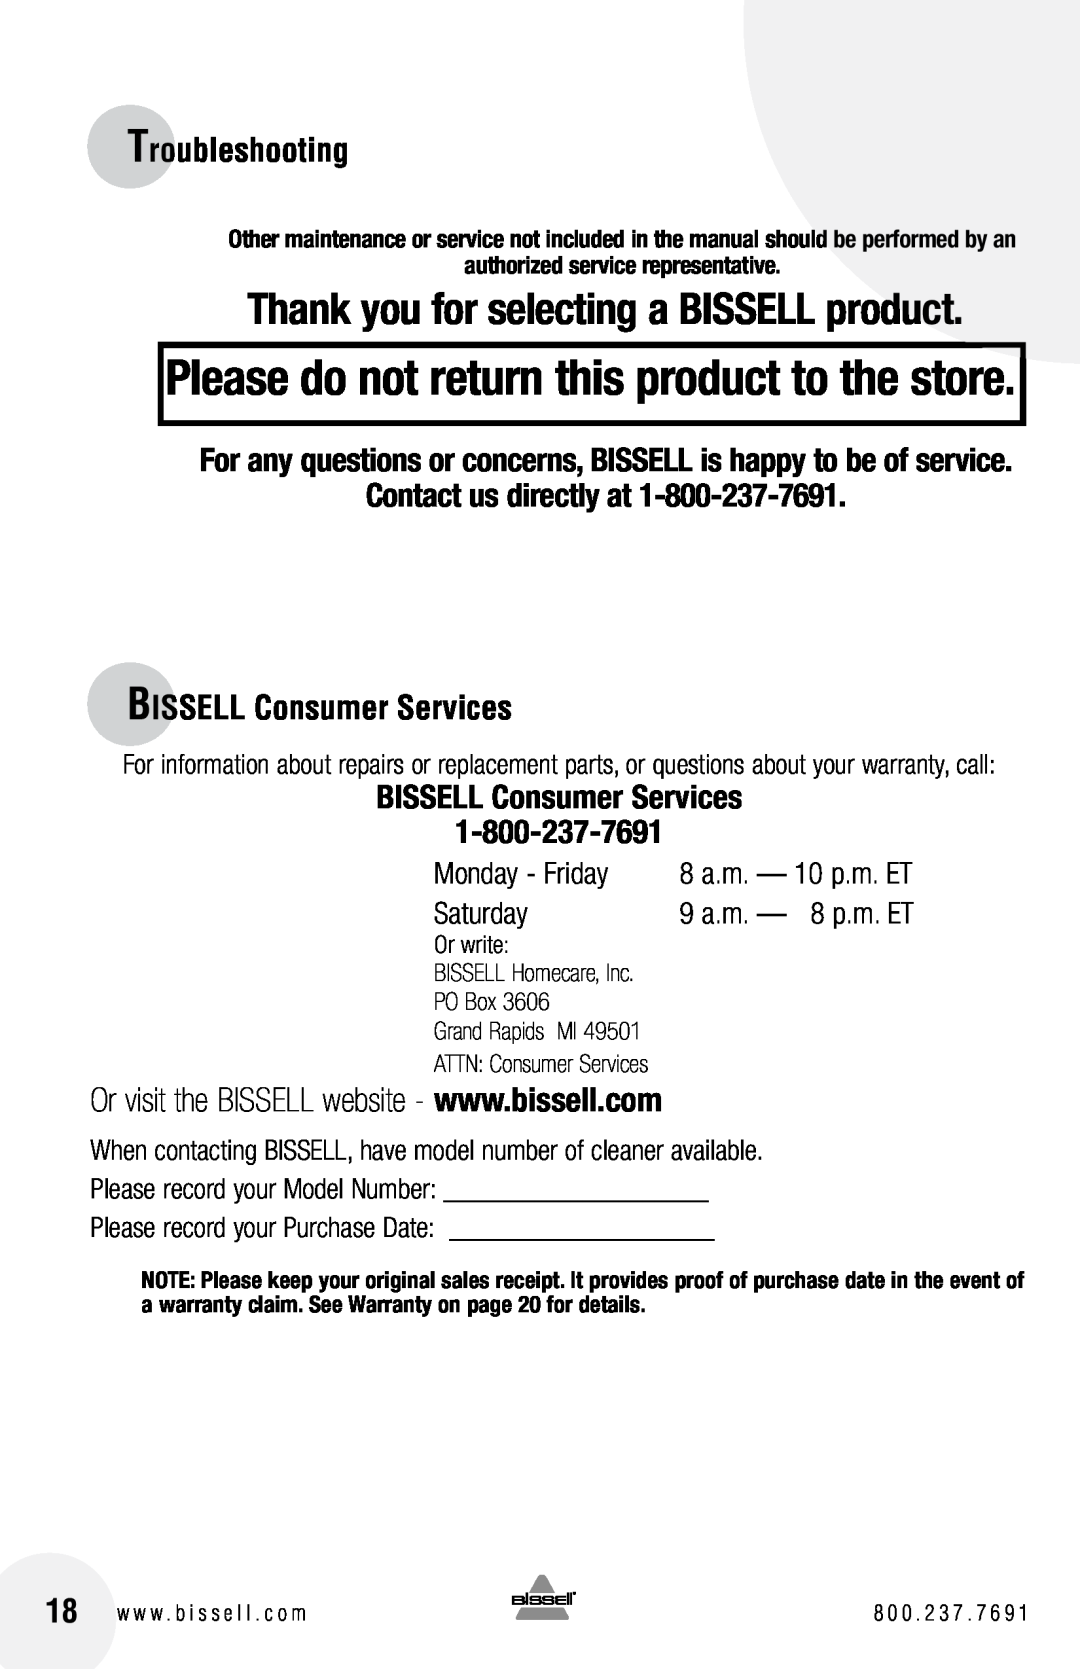 Bissell 6750 Please do not return this product to the store, Contact us directly at, BISSELL Consumer Services, Saturday 